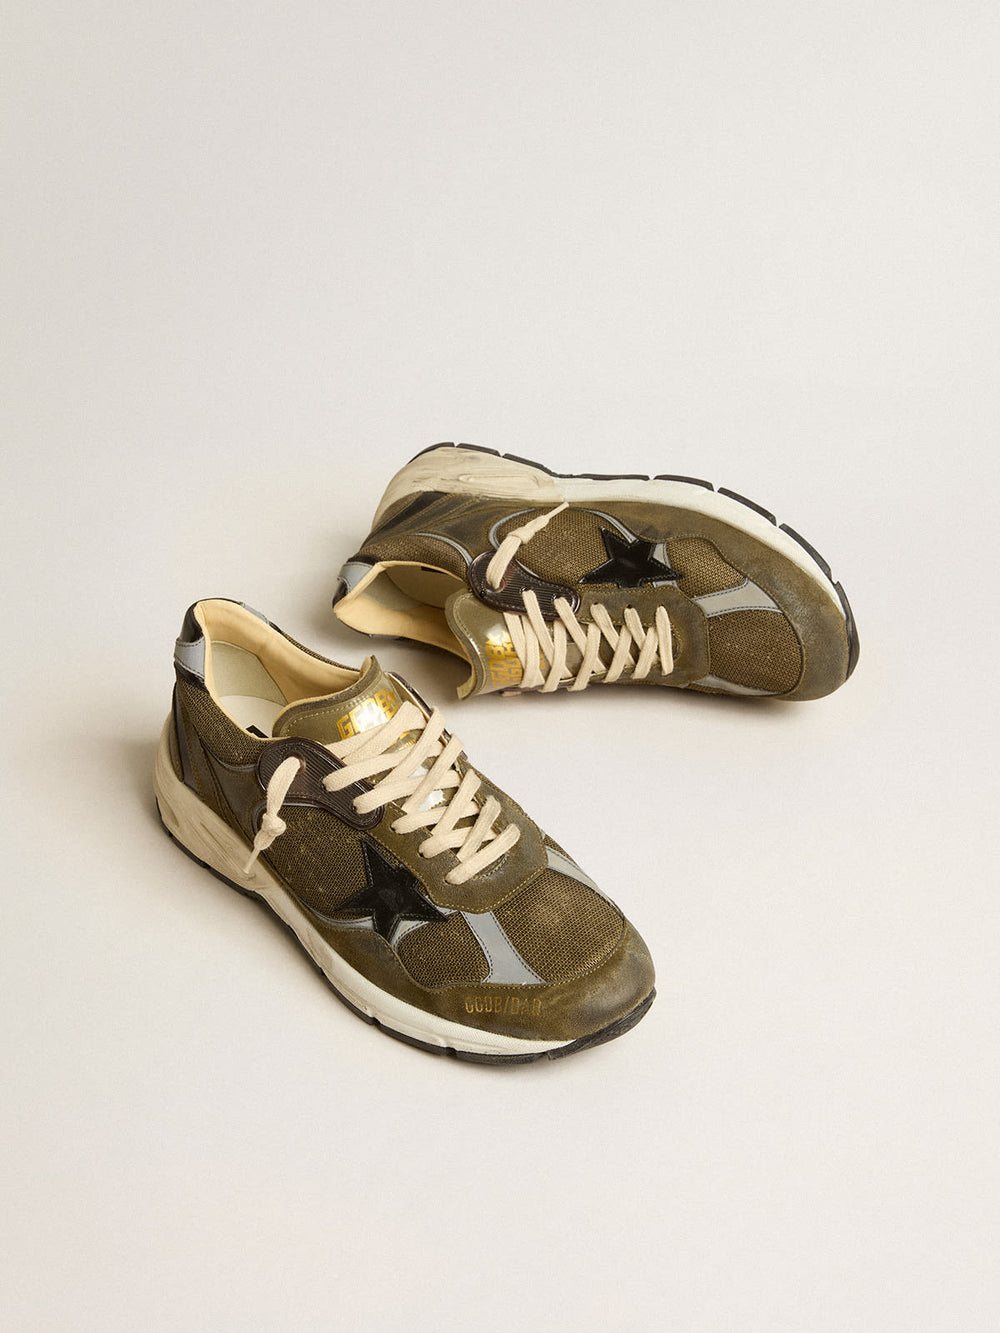 Man Dad Star Suede and Mesh w/ Black Leather Star and Heel Tab